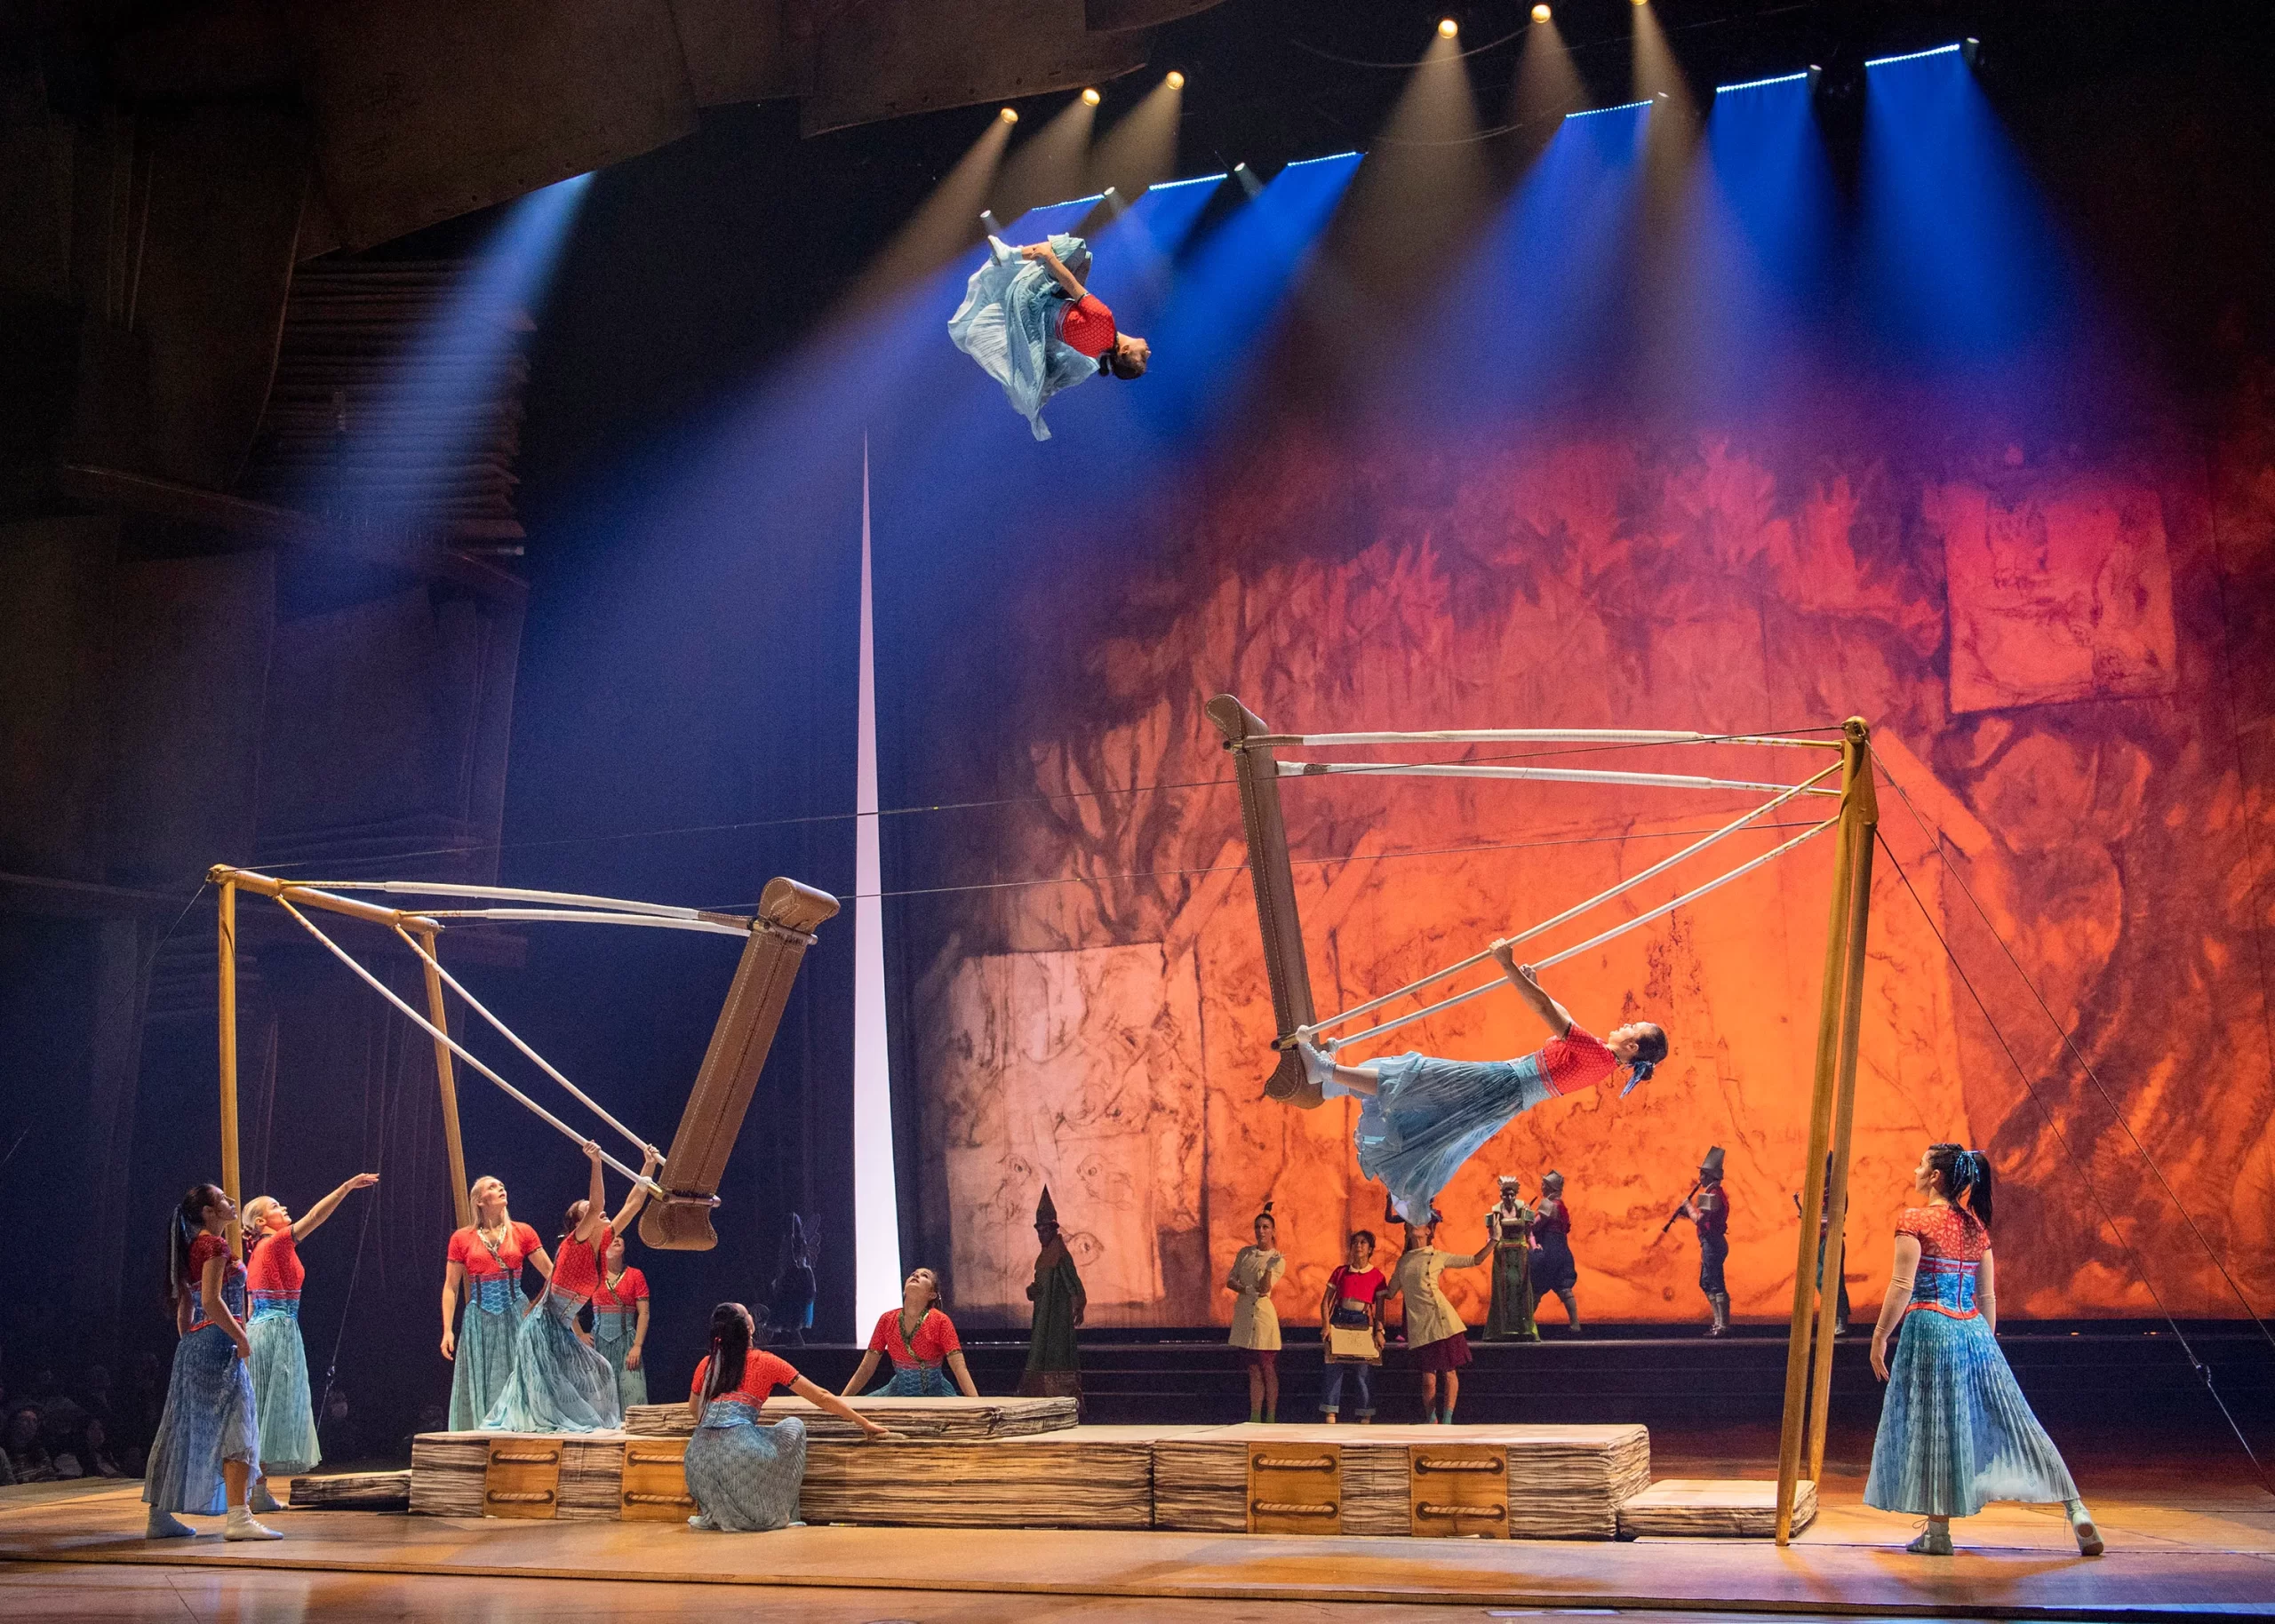 Russian swing act in Cirque du Soleil Drawn to Life